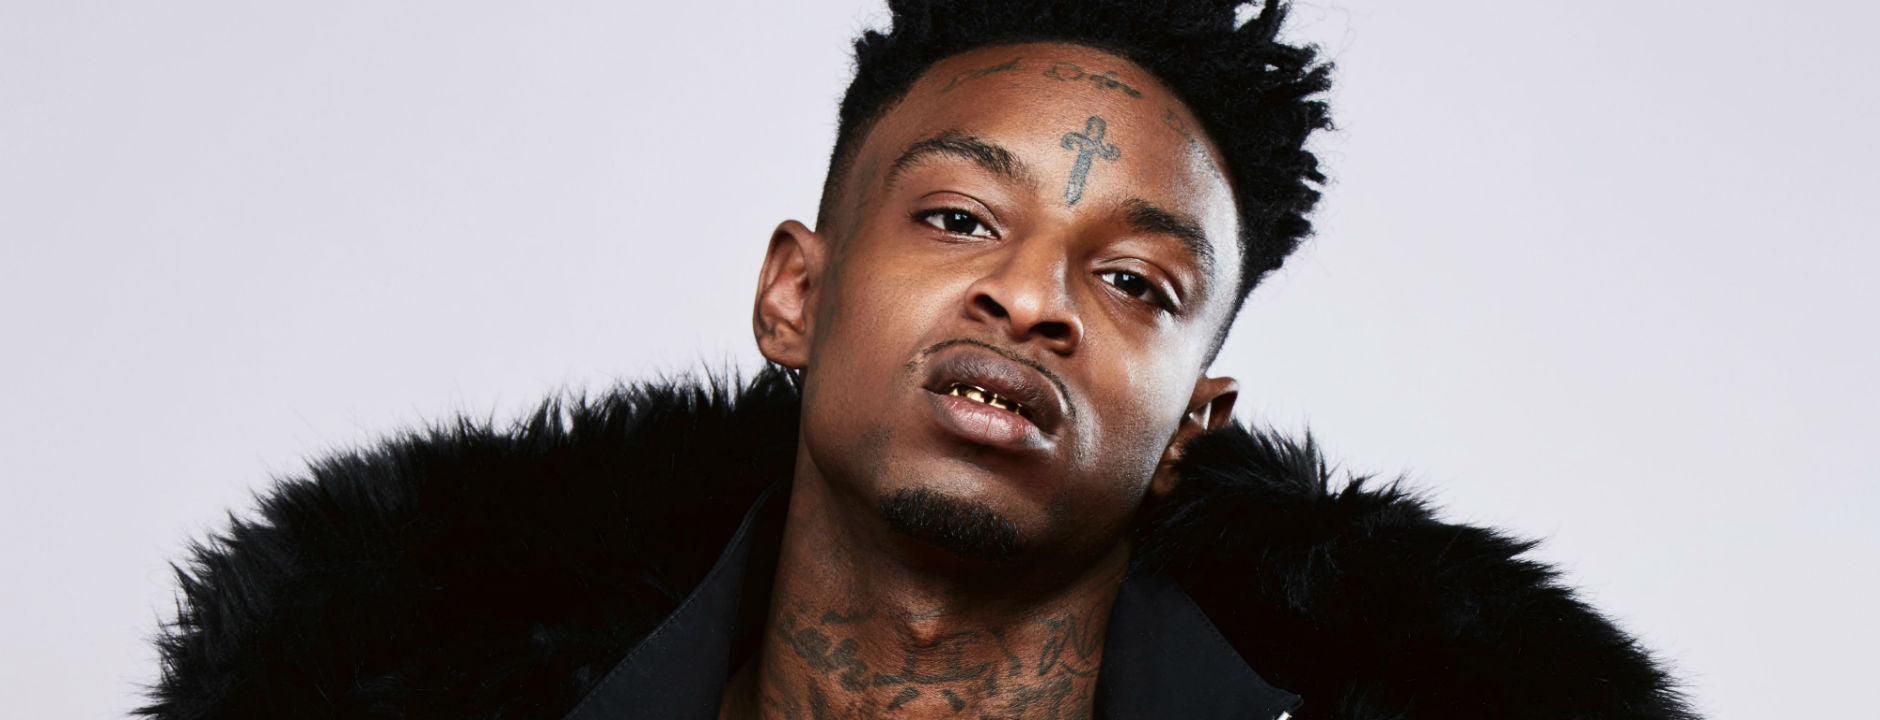 Rapper 21 Savage Has Some Financial Advice